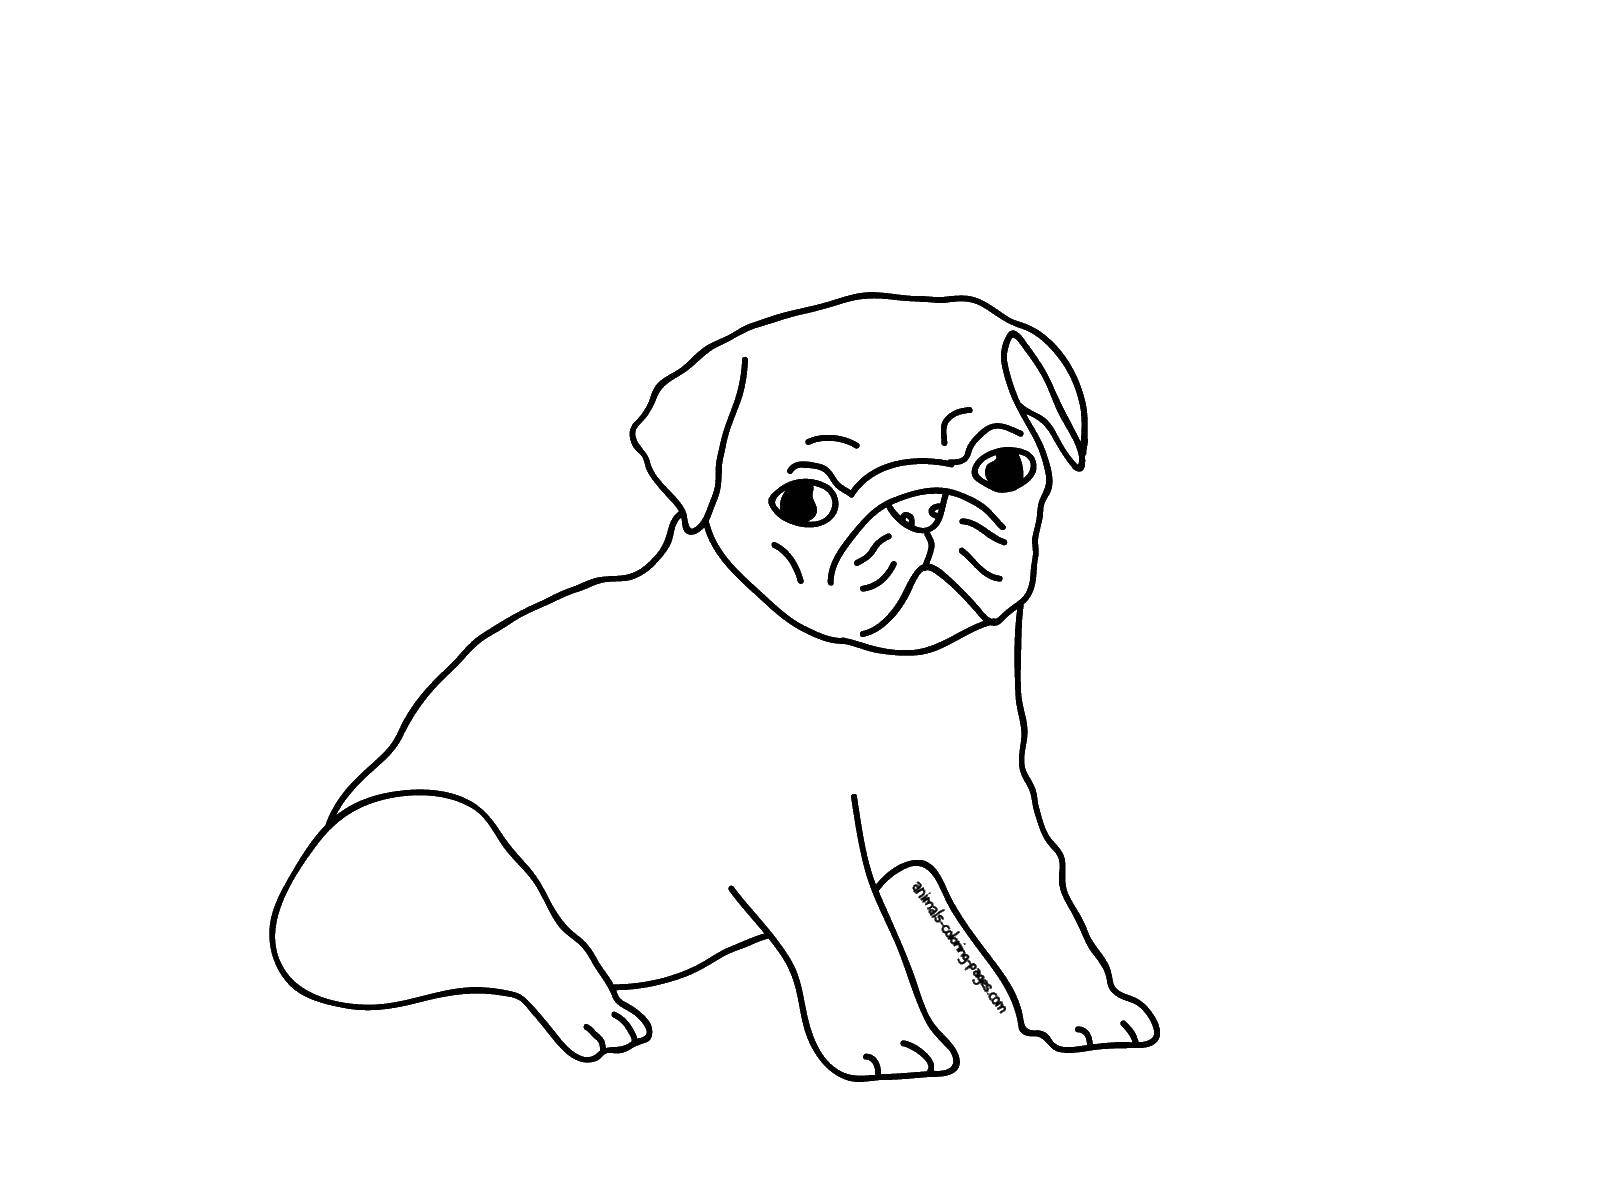 Coloring Cutie pug. Category Pets allowed. Tags:  Animals, dog.